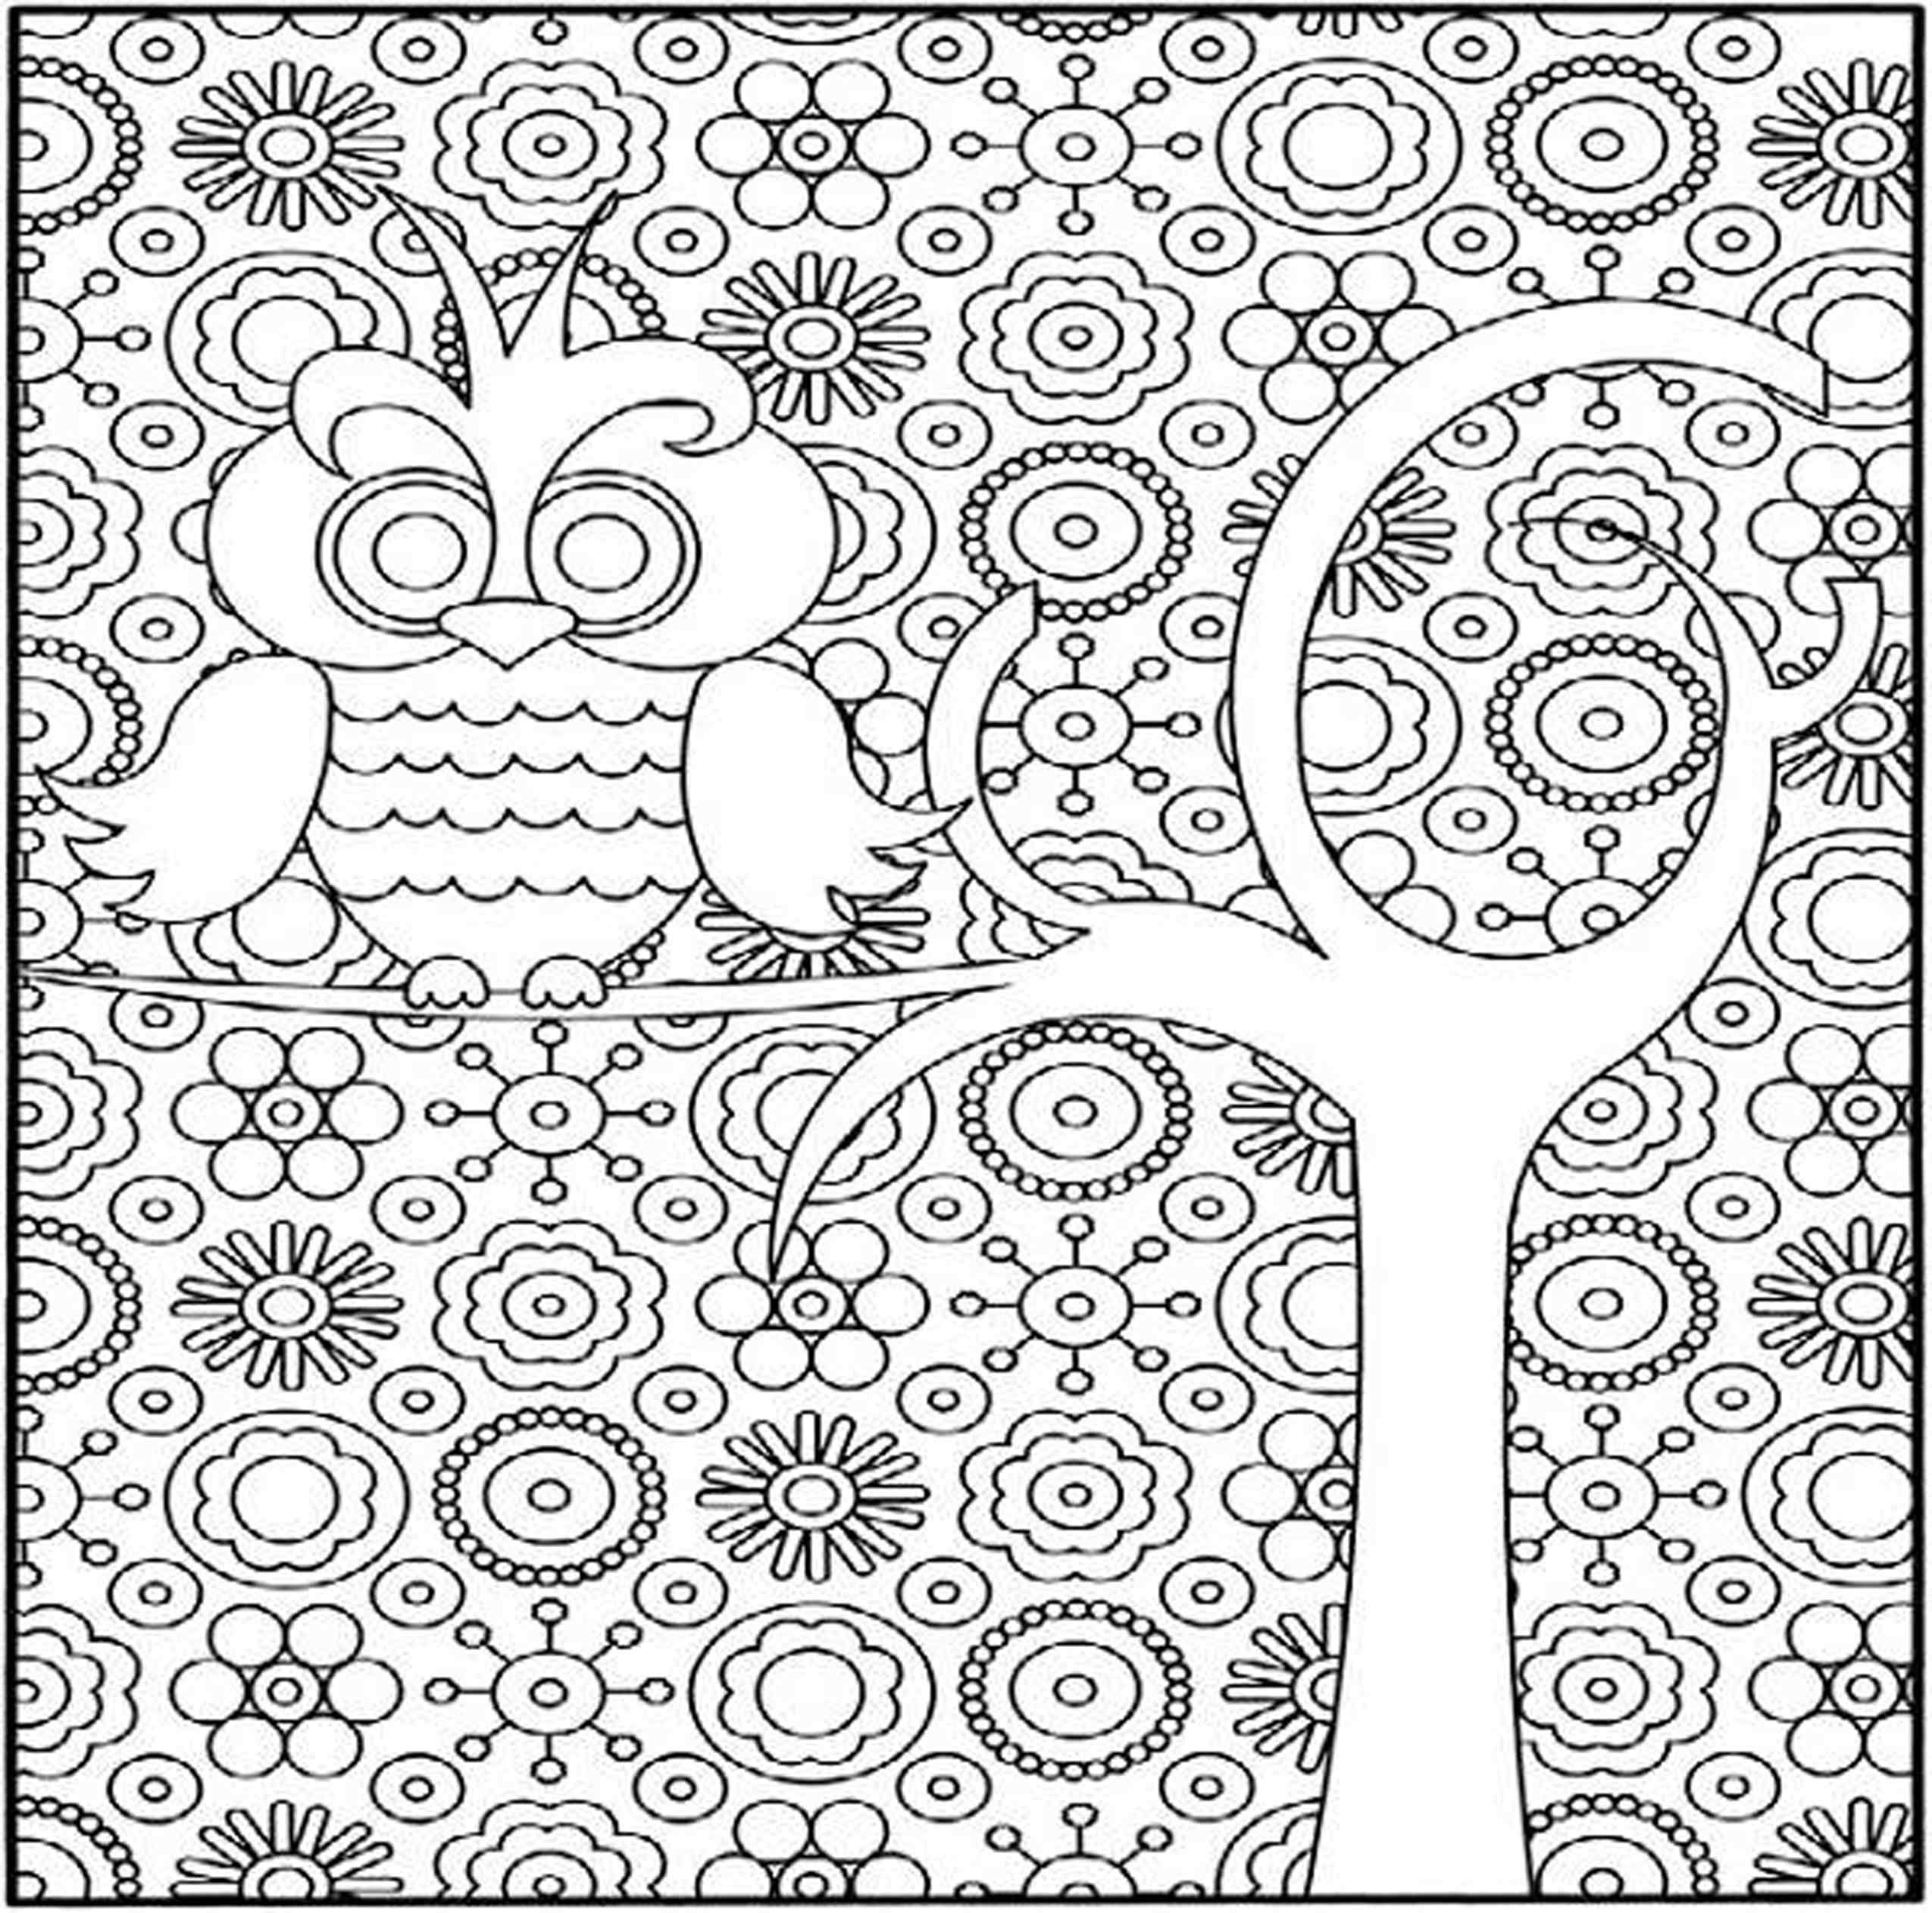 Free Coloring Pages Teens, Download Free Coloring Pages Teens png